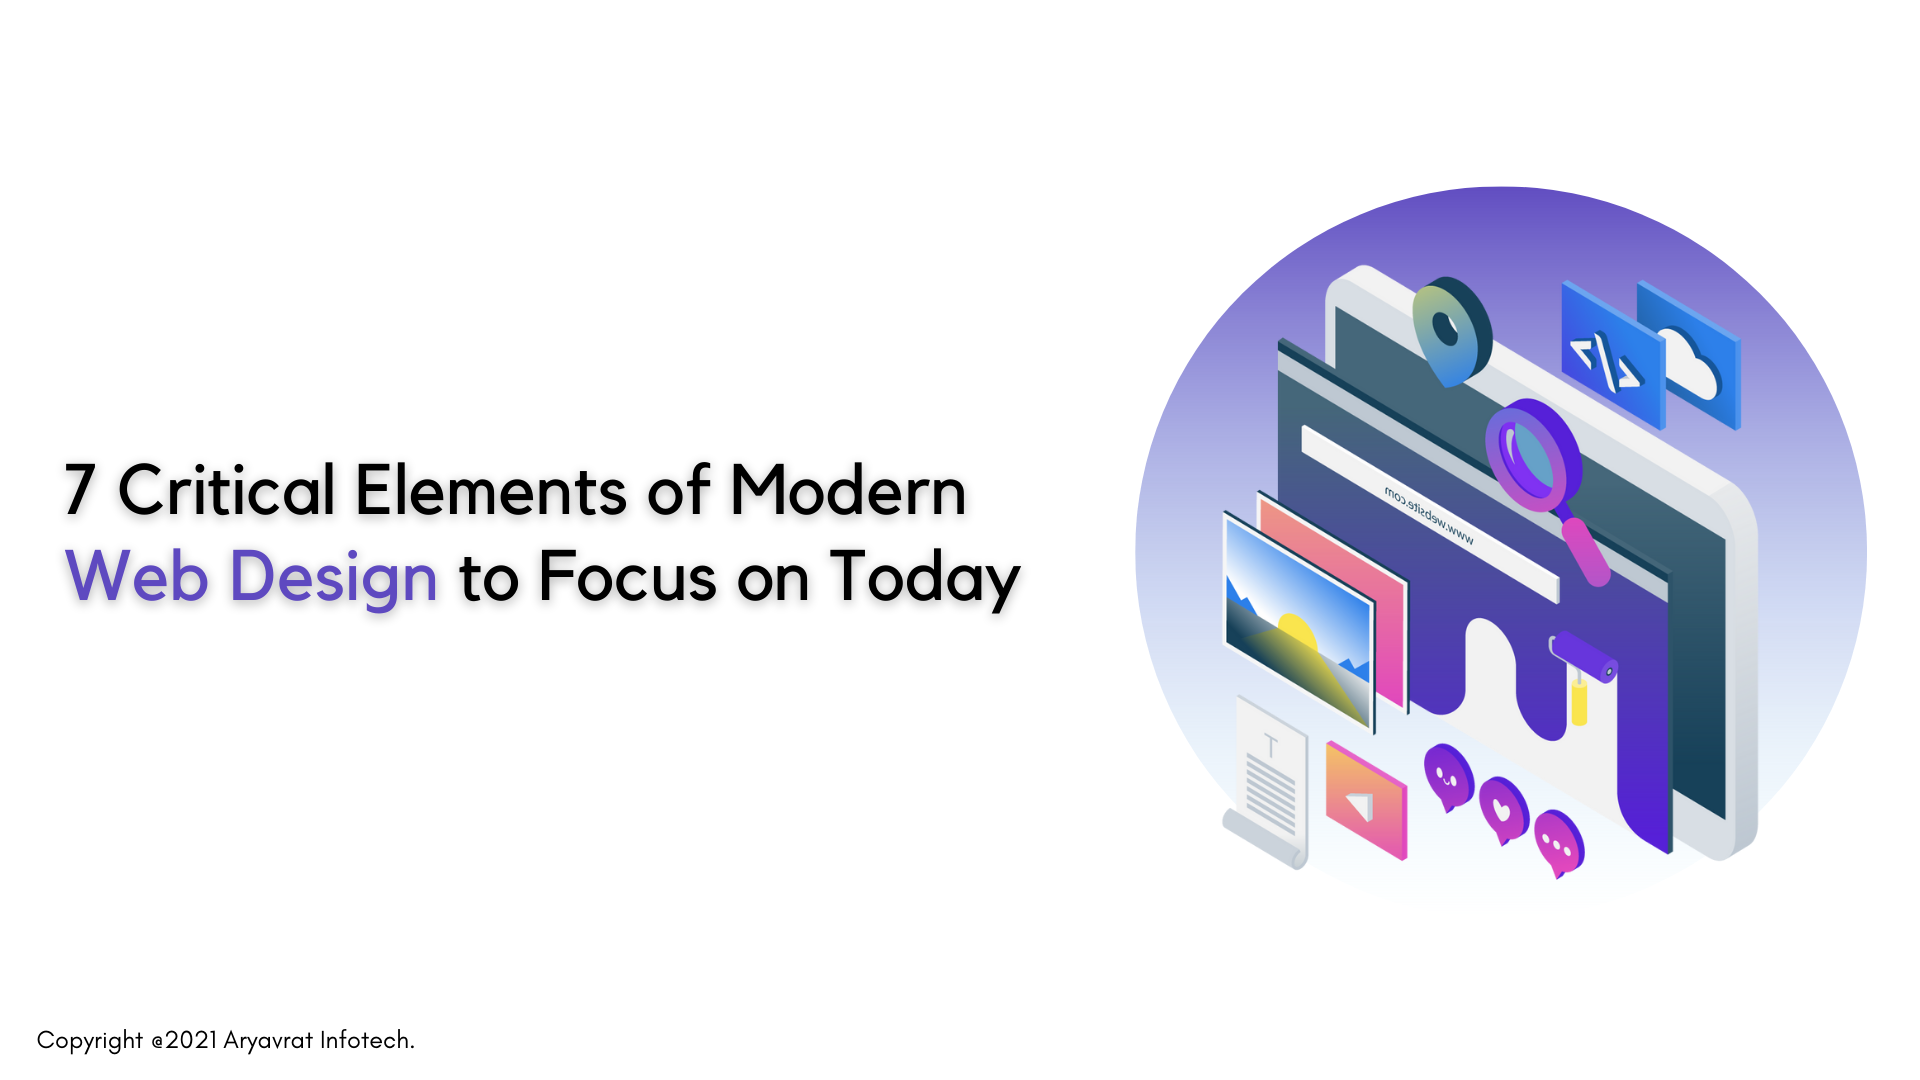 7 Critical Elements of Modern Web Design to Focus on Today